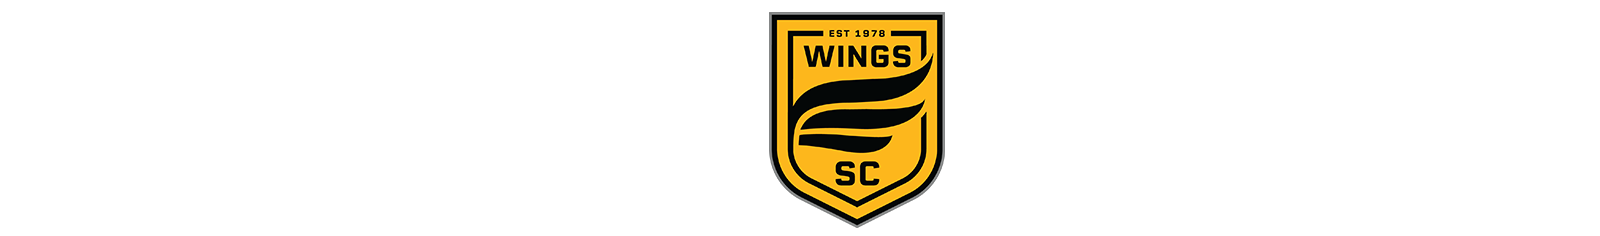 Club logo with Wheaton Wings Soccer Club text in heading banner